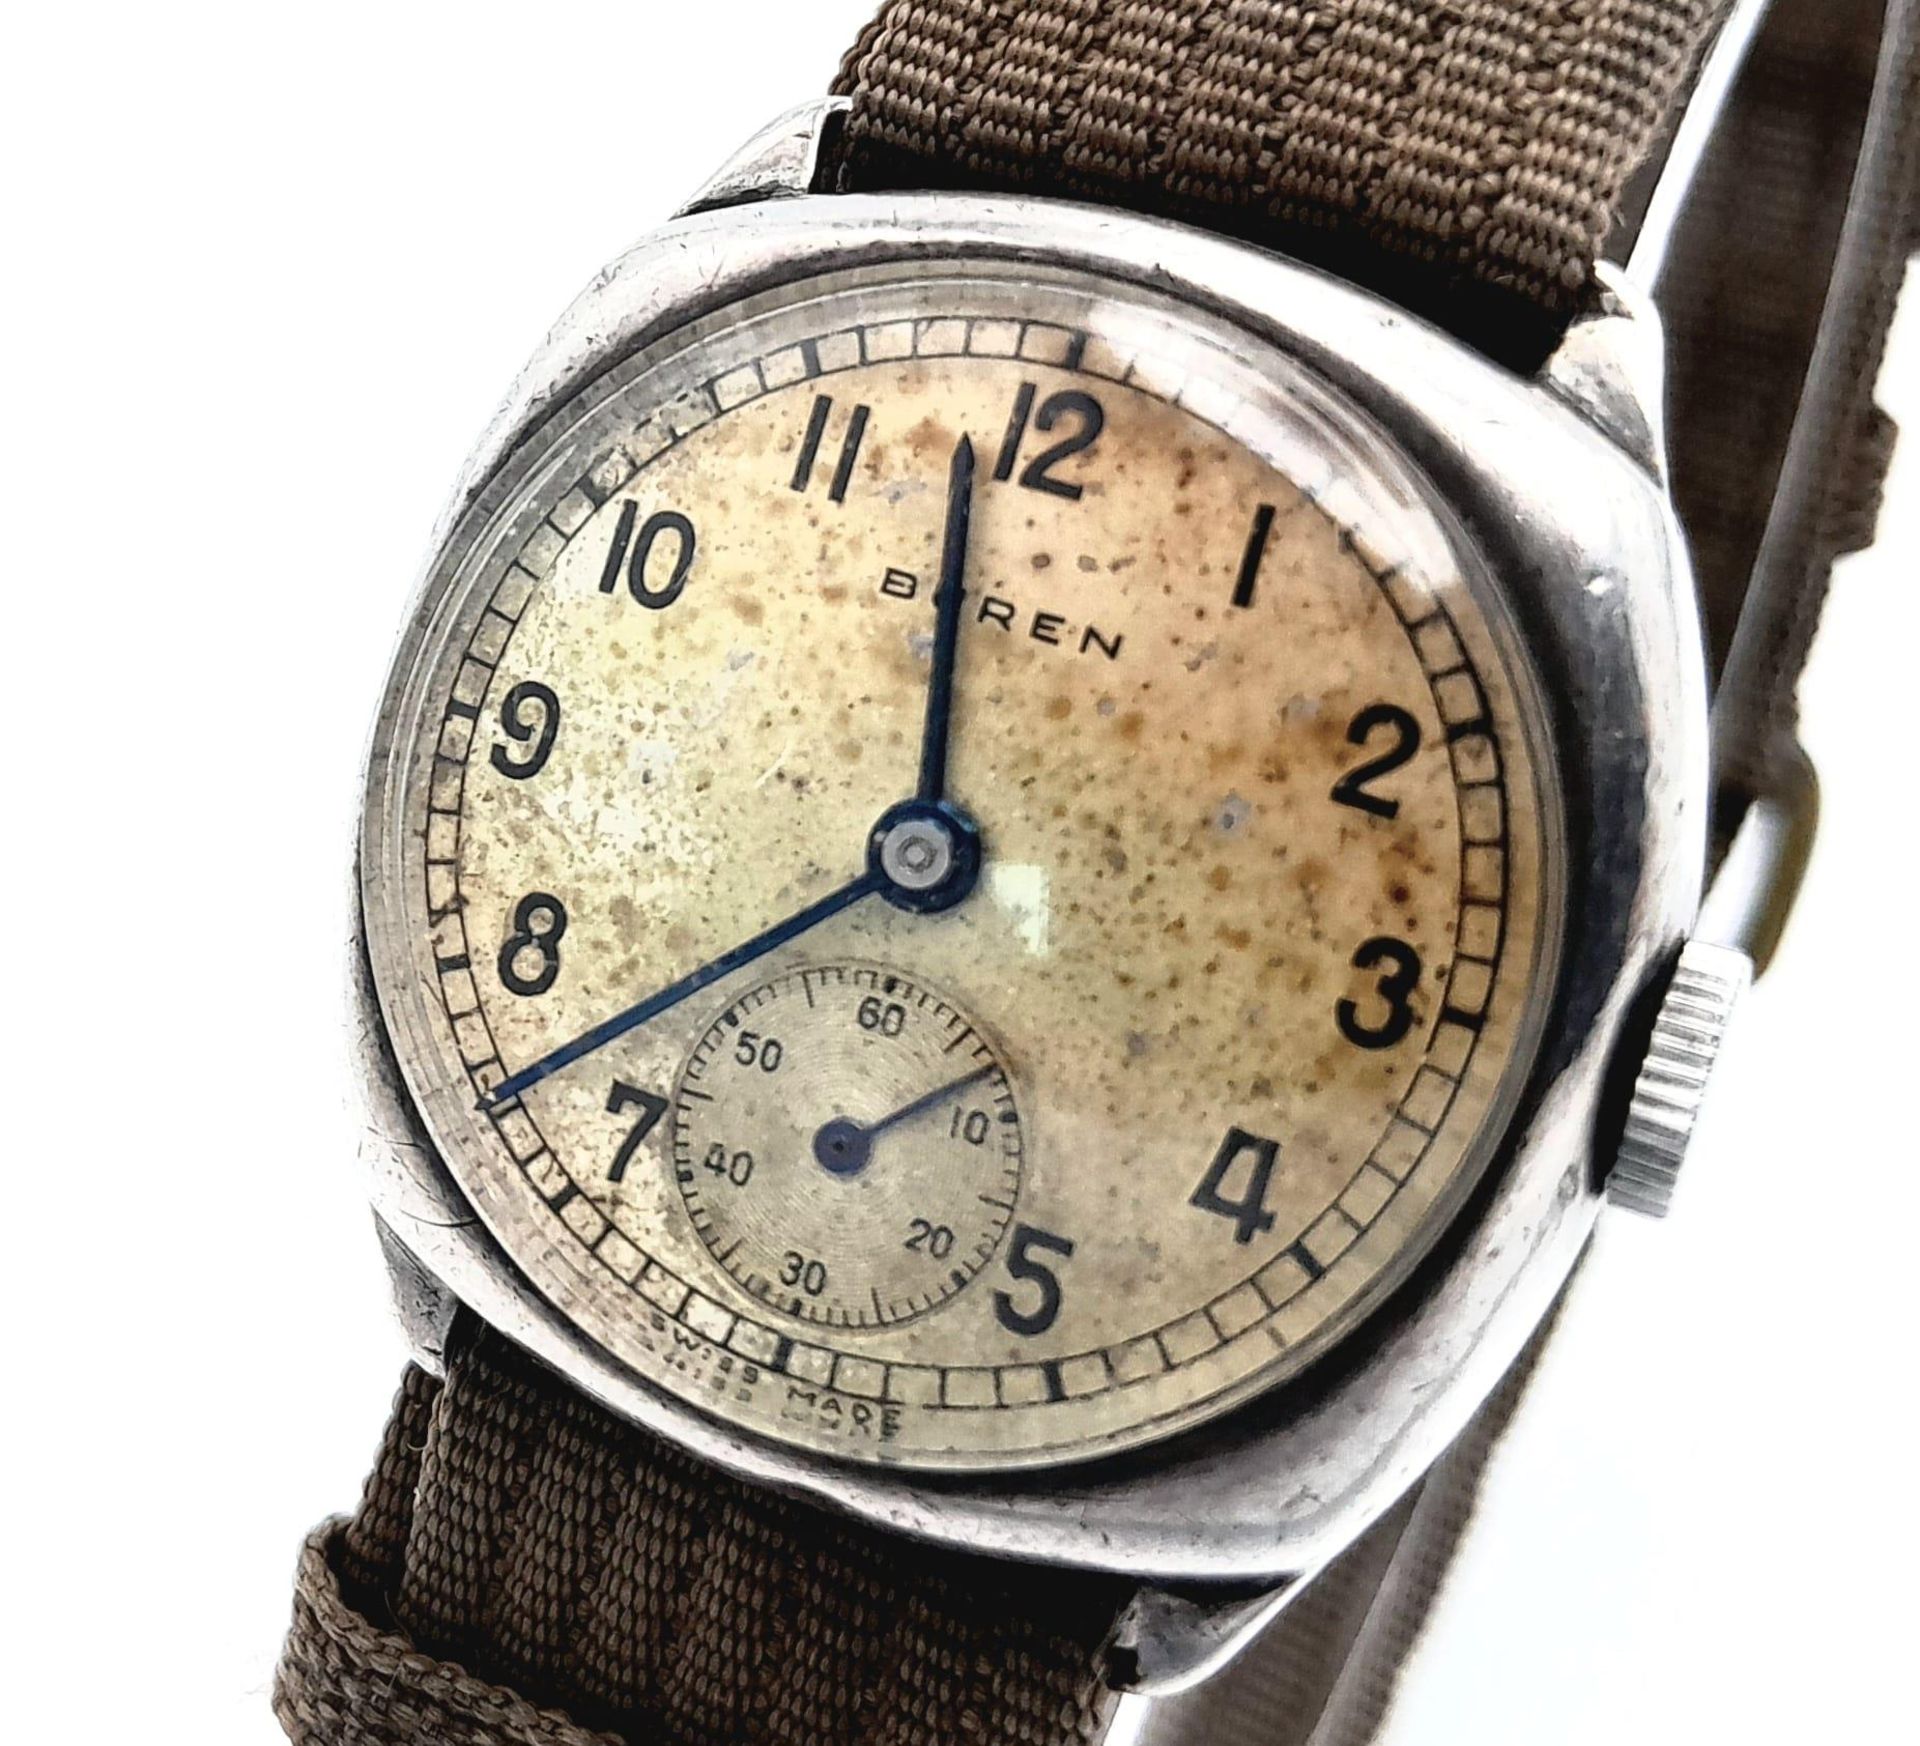 A Vintage Buren (1940s) Mechanical Gents Watch. Textile strap. Stainless steel case - 30mm. Patinaed - Image 2 of 5